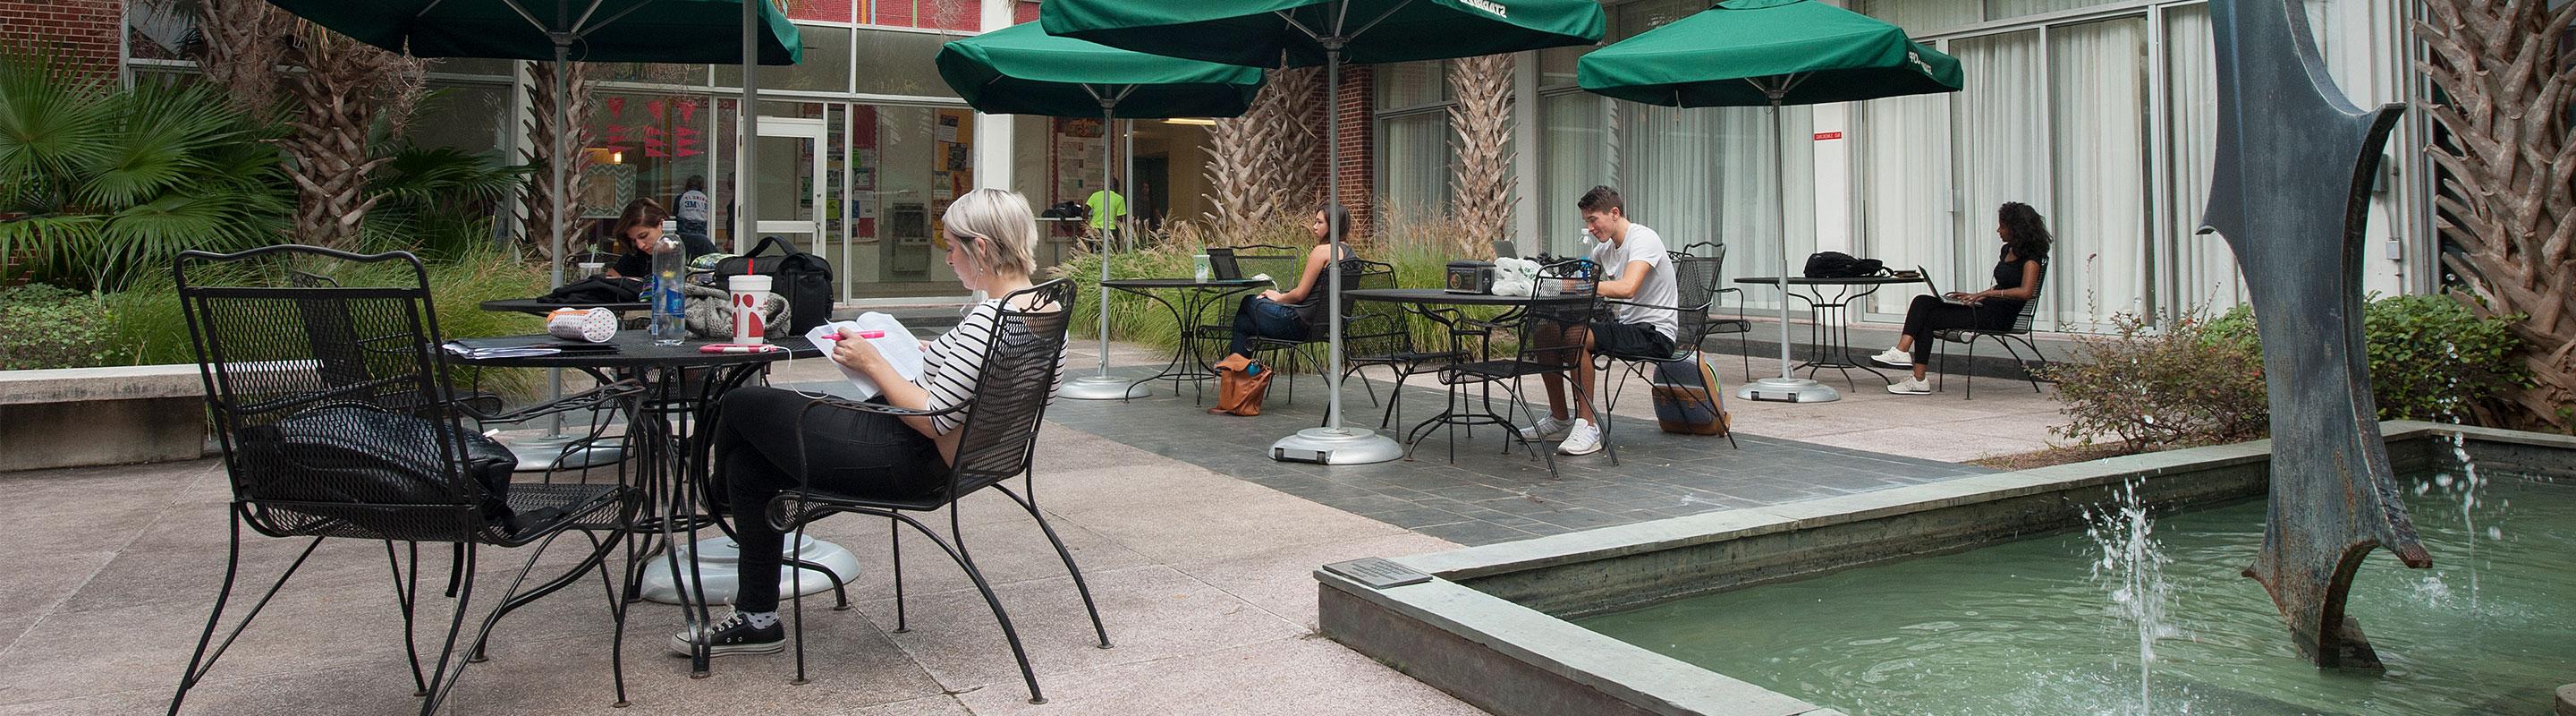 Students Study in Danna Center Courtyard